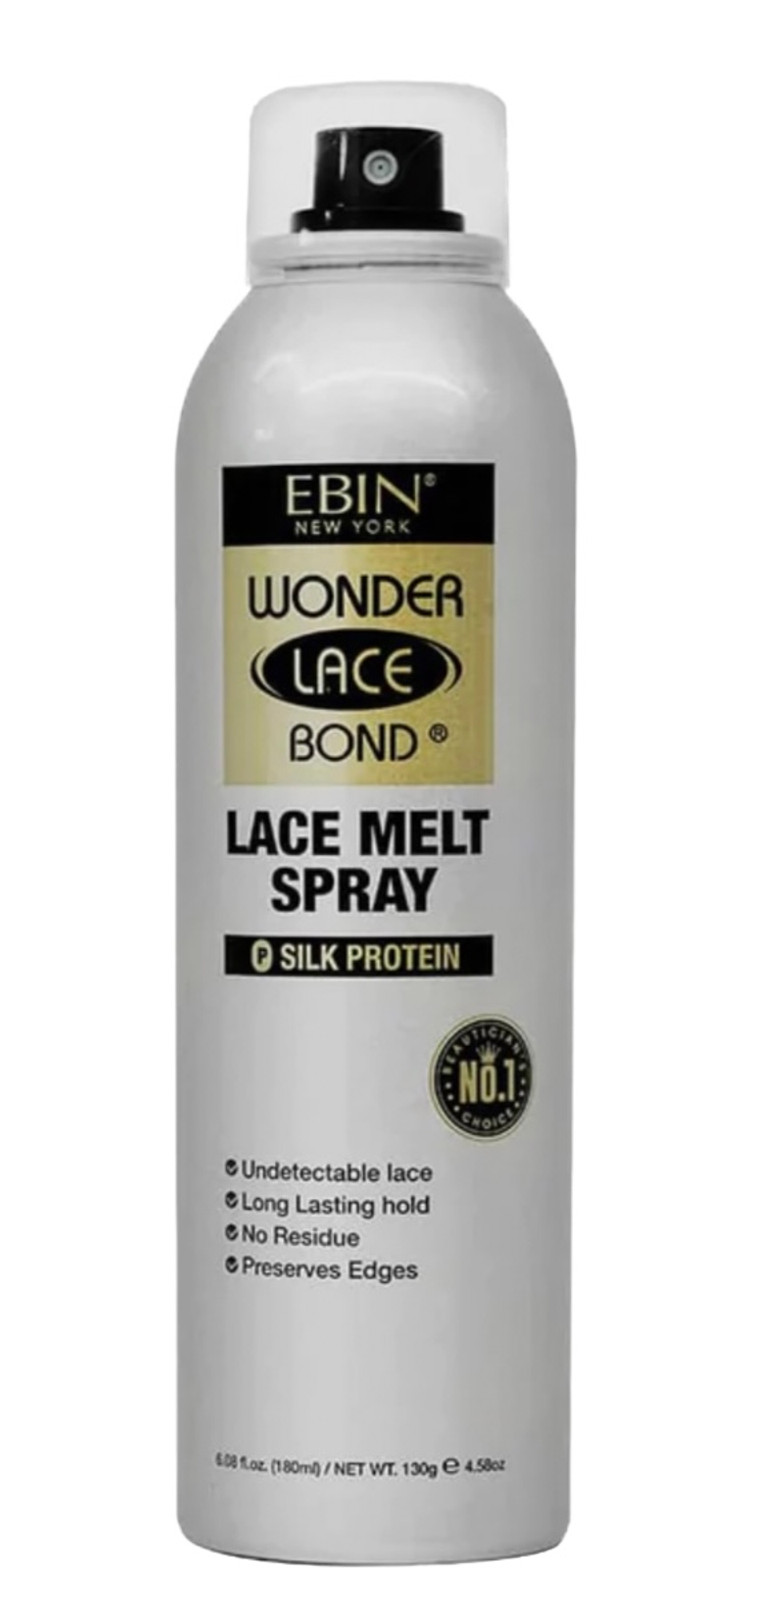 WIG ESSENTIALS : Beauty 4 Less on Instagram: EBIN Wonder Lace Melt Spray  is the perfect melting spray to apply your wig seamlessly by melting lace  onto the scalp and hairline for